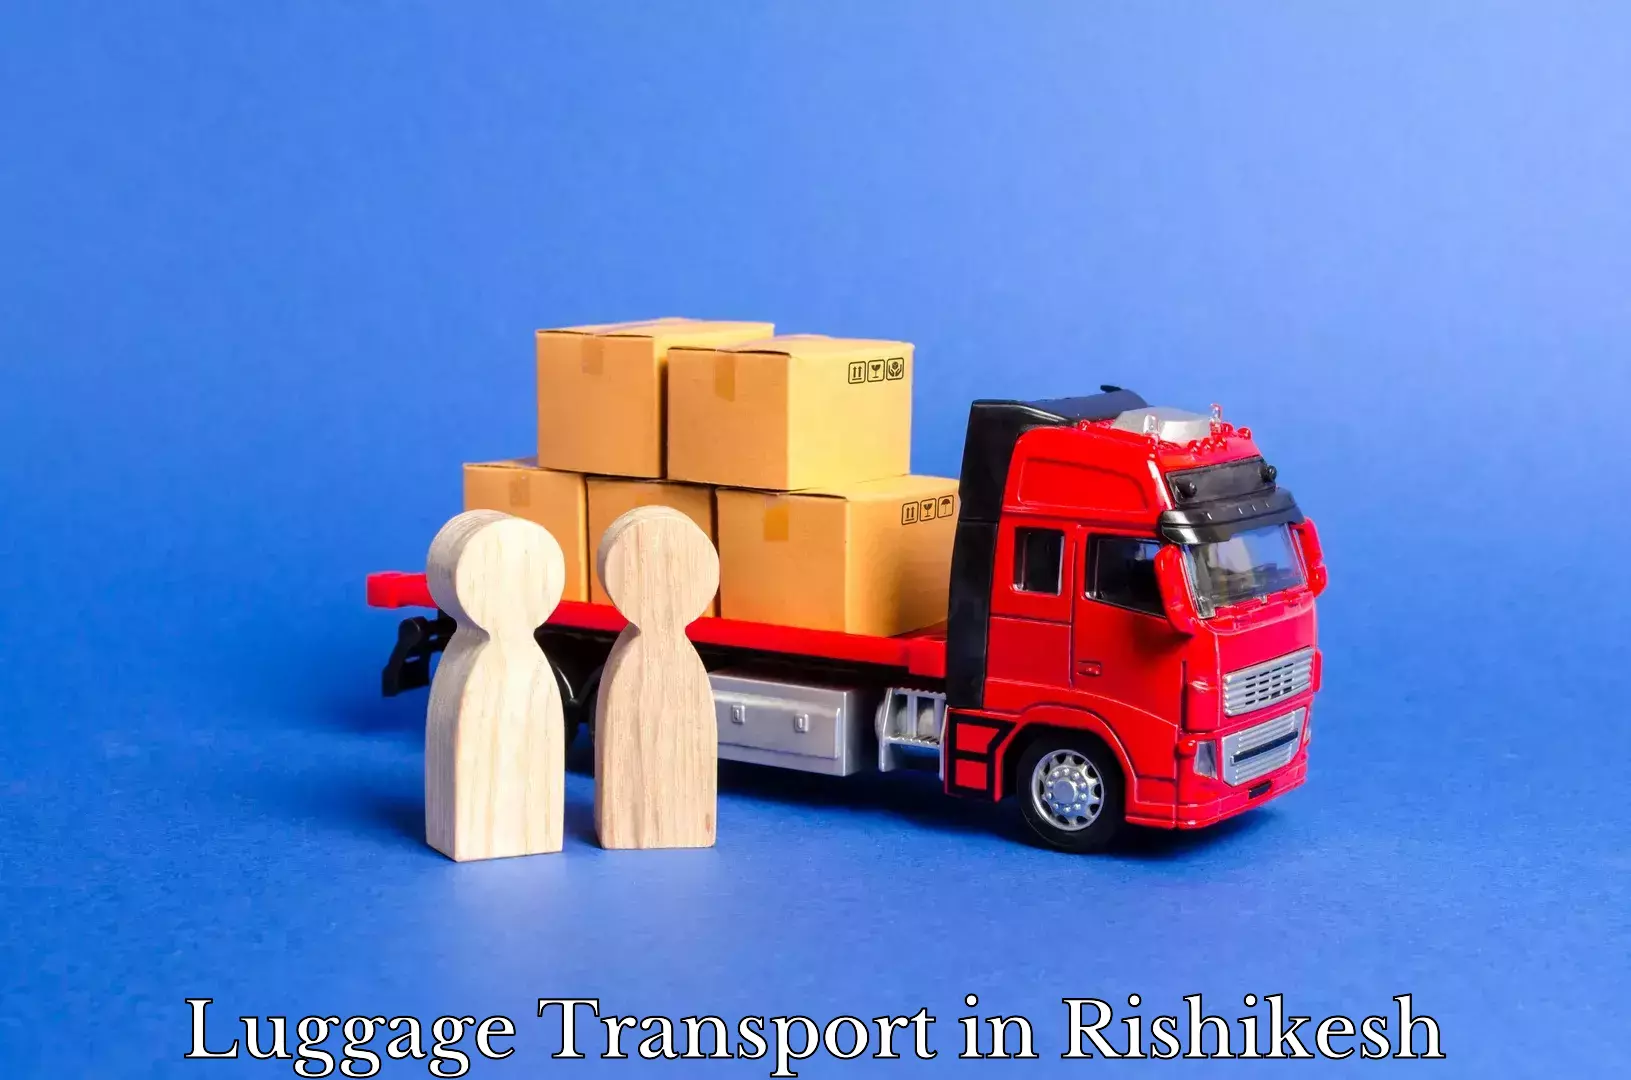 Baggage transport services in Rishikesh